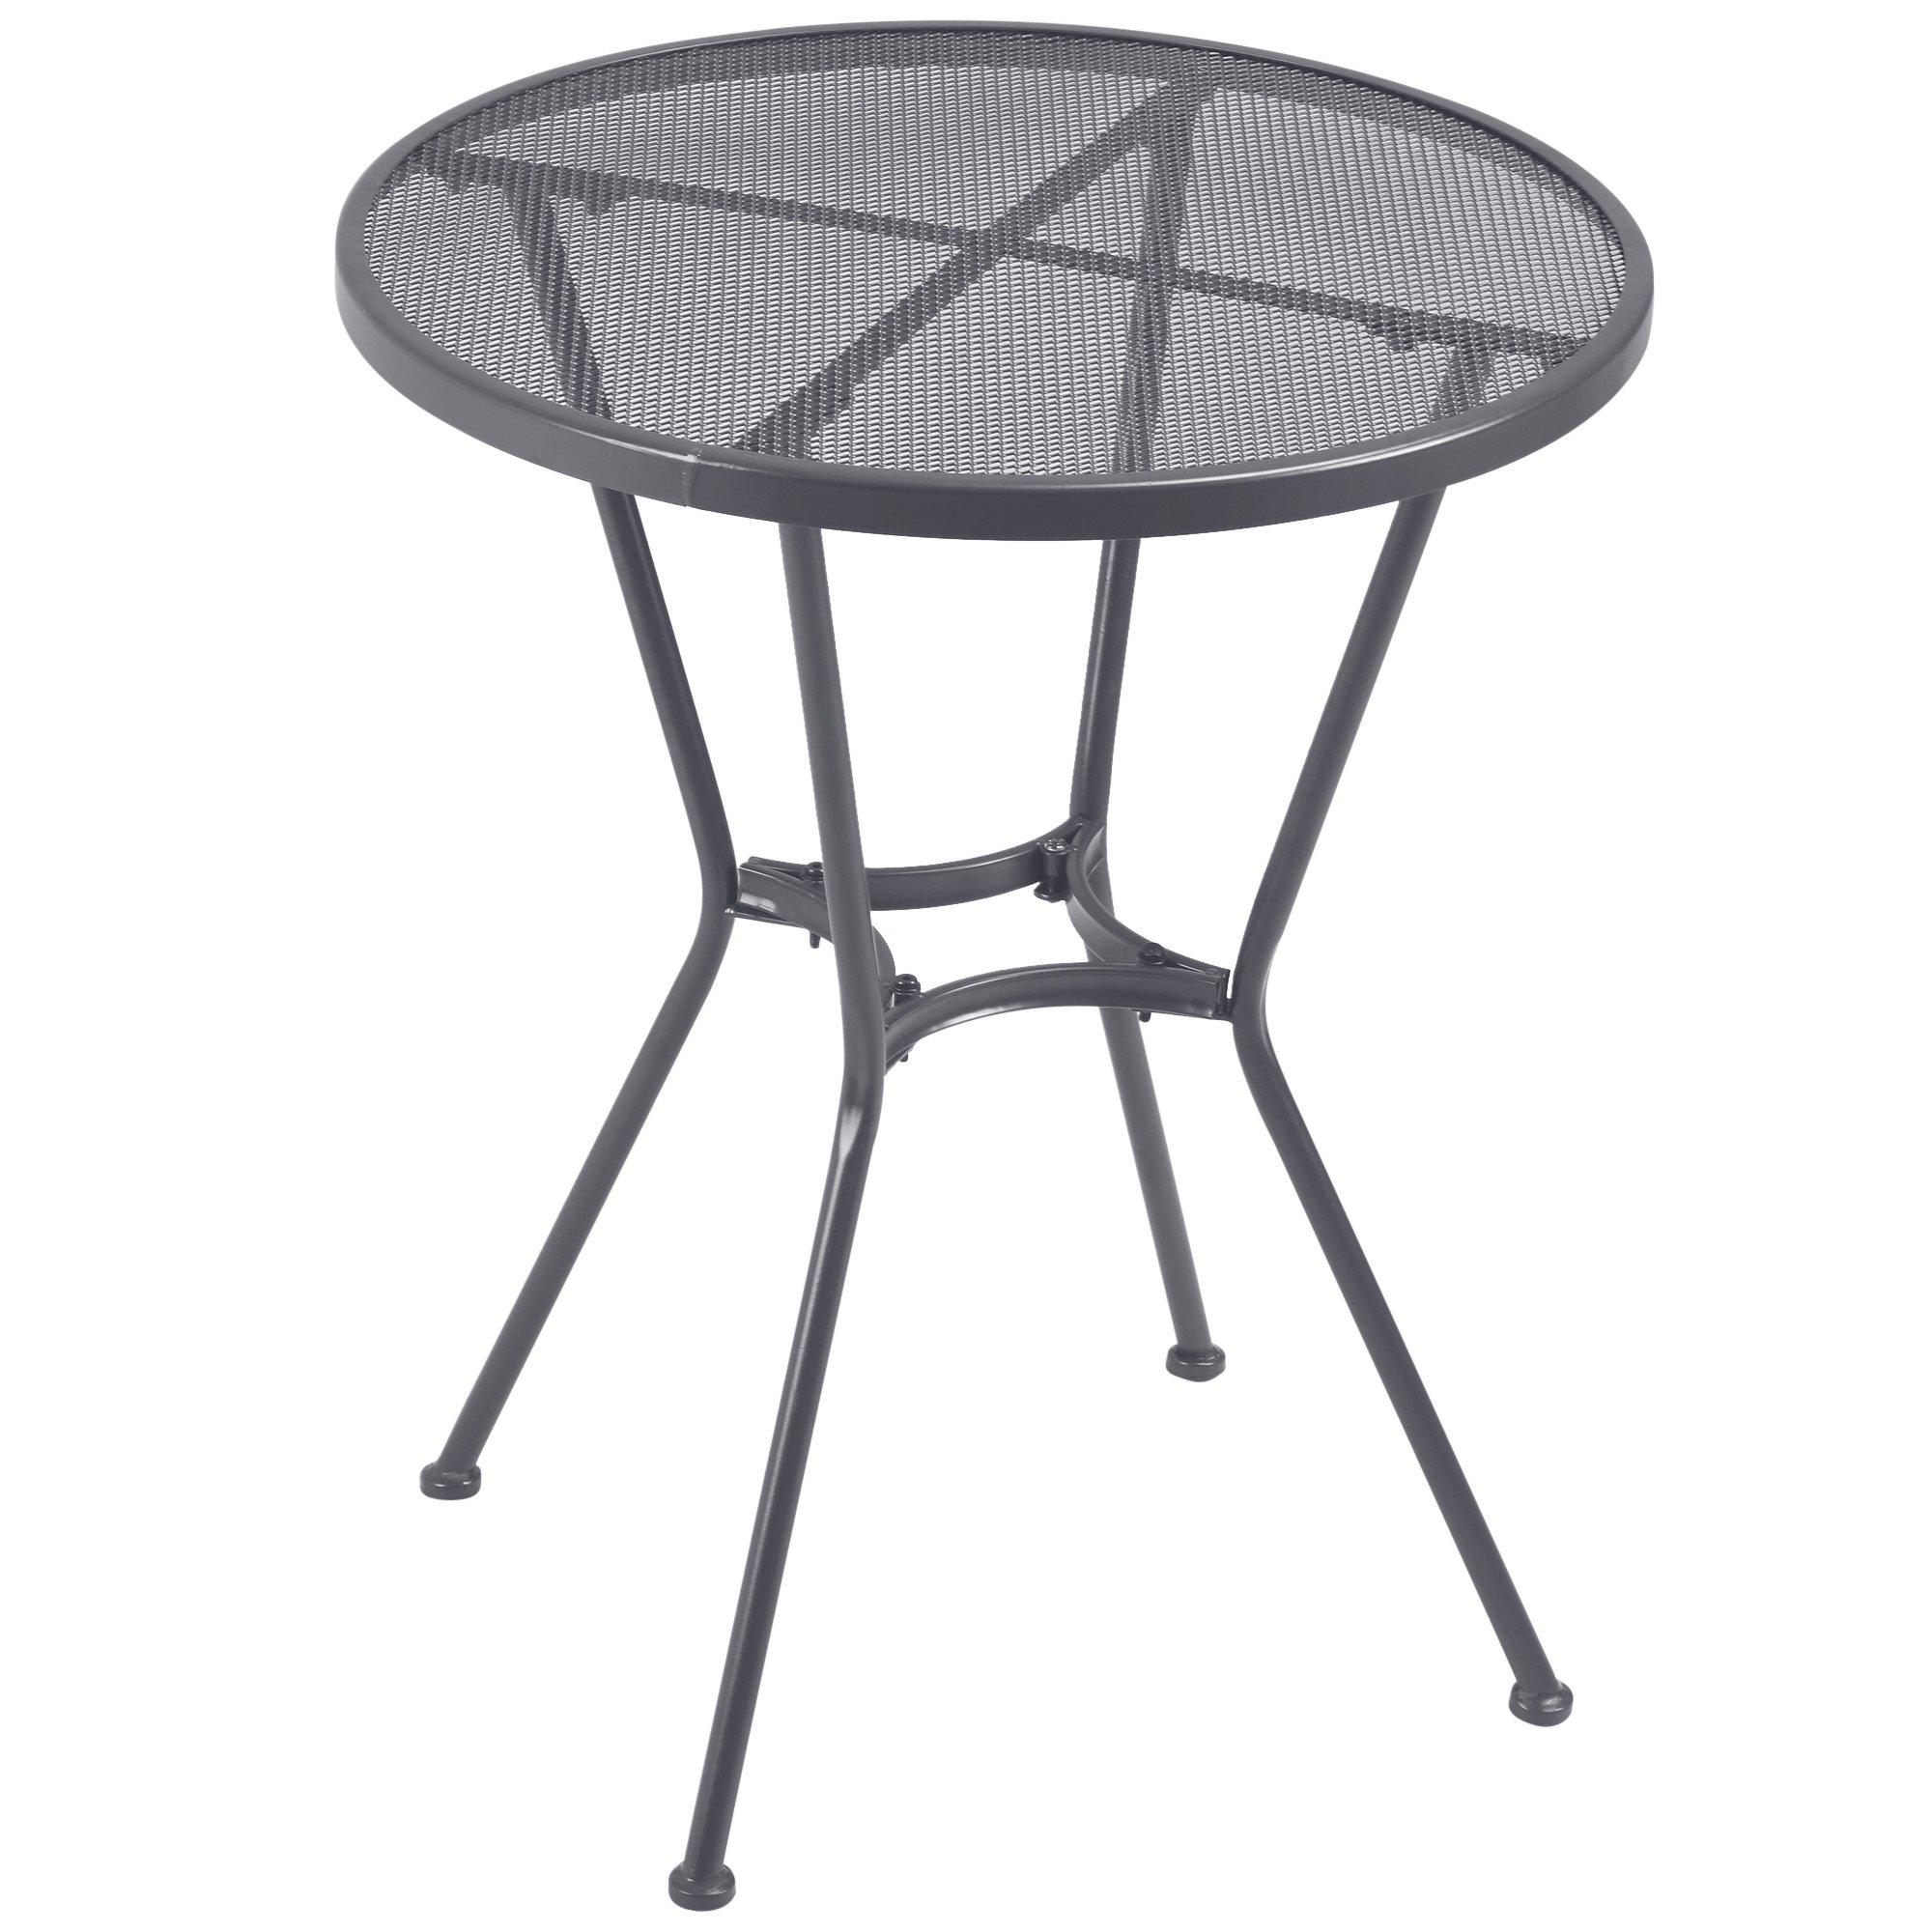 60cm Garden Round Bistro Table with Mesh Tabletop for Balcony Deck